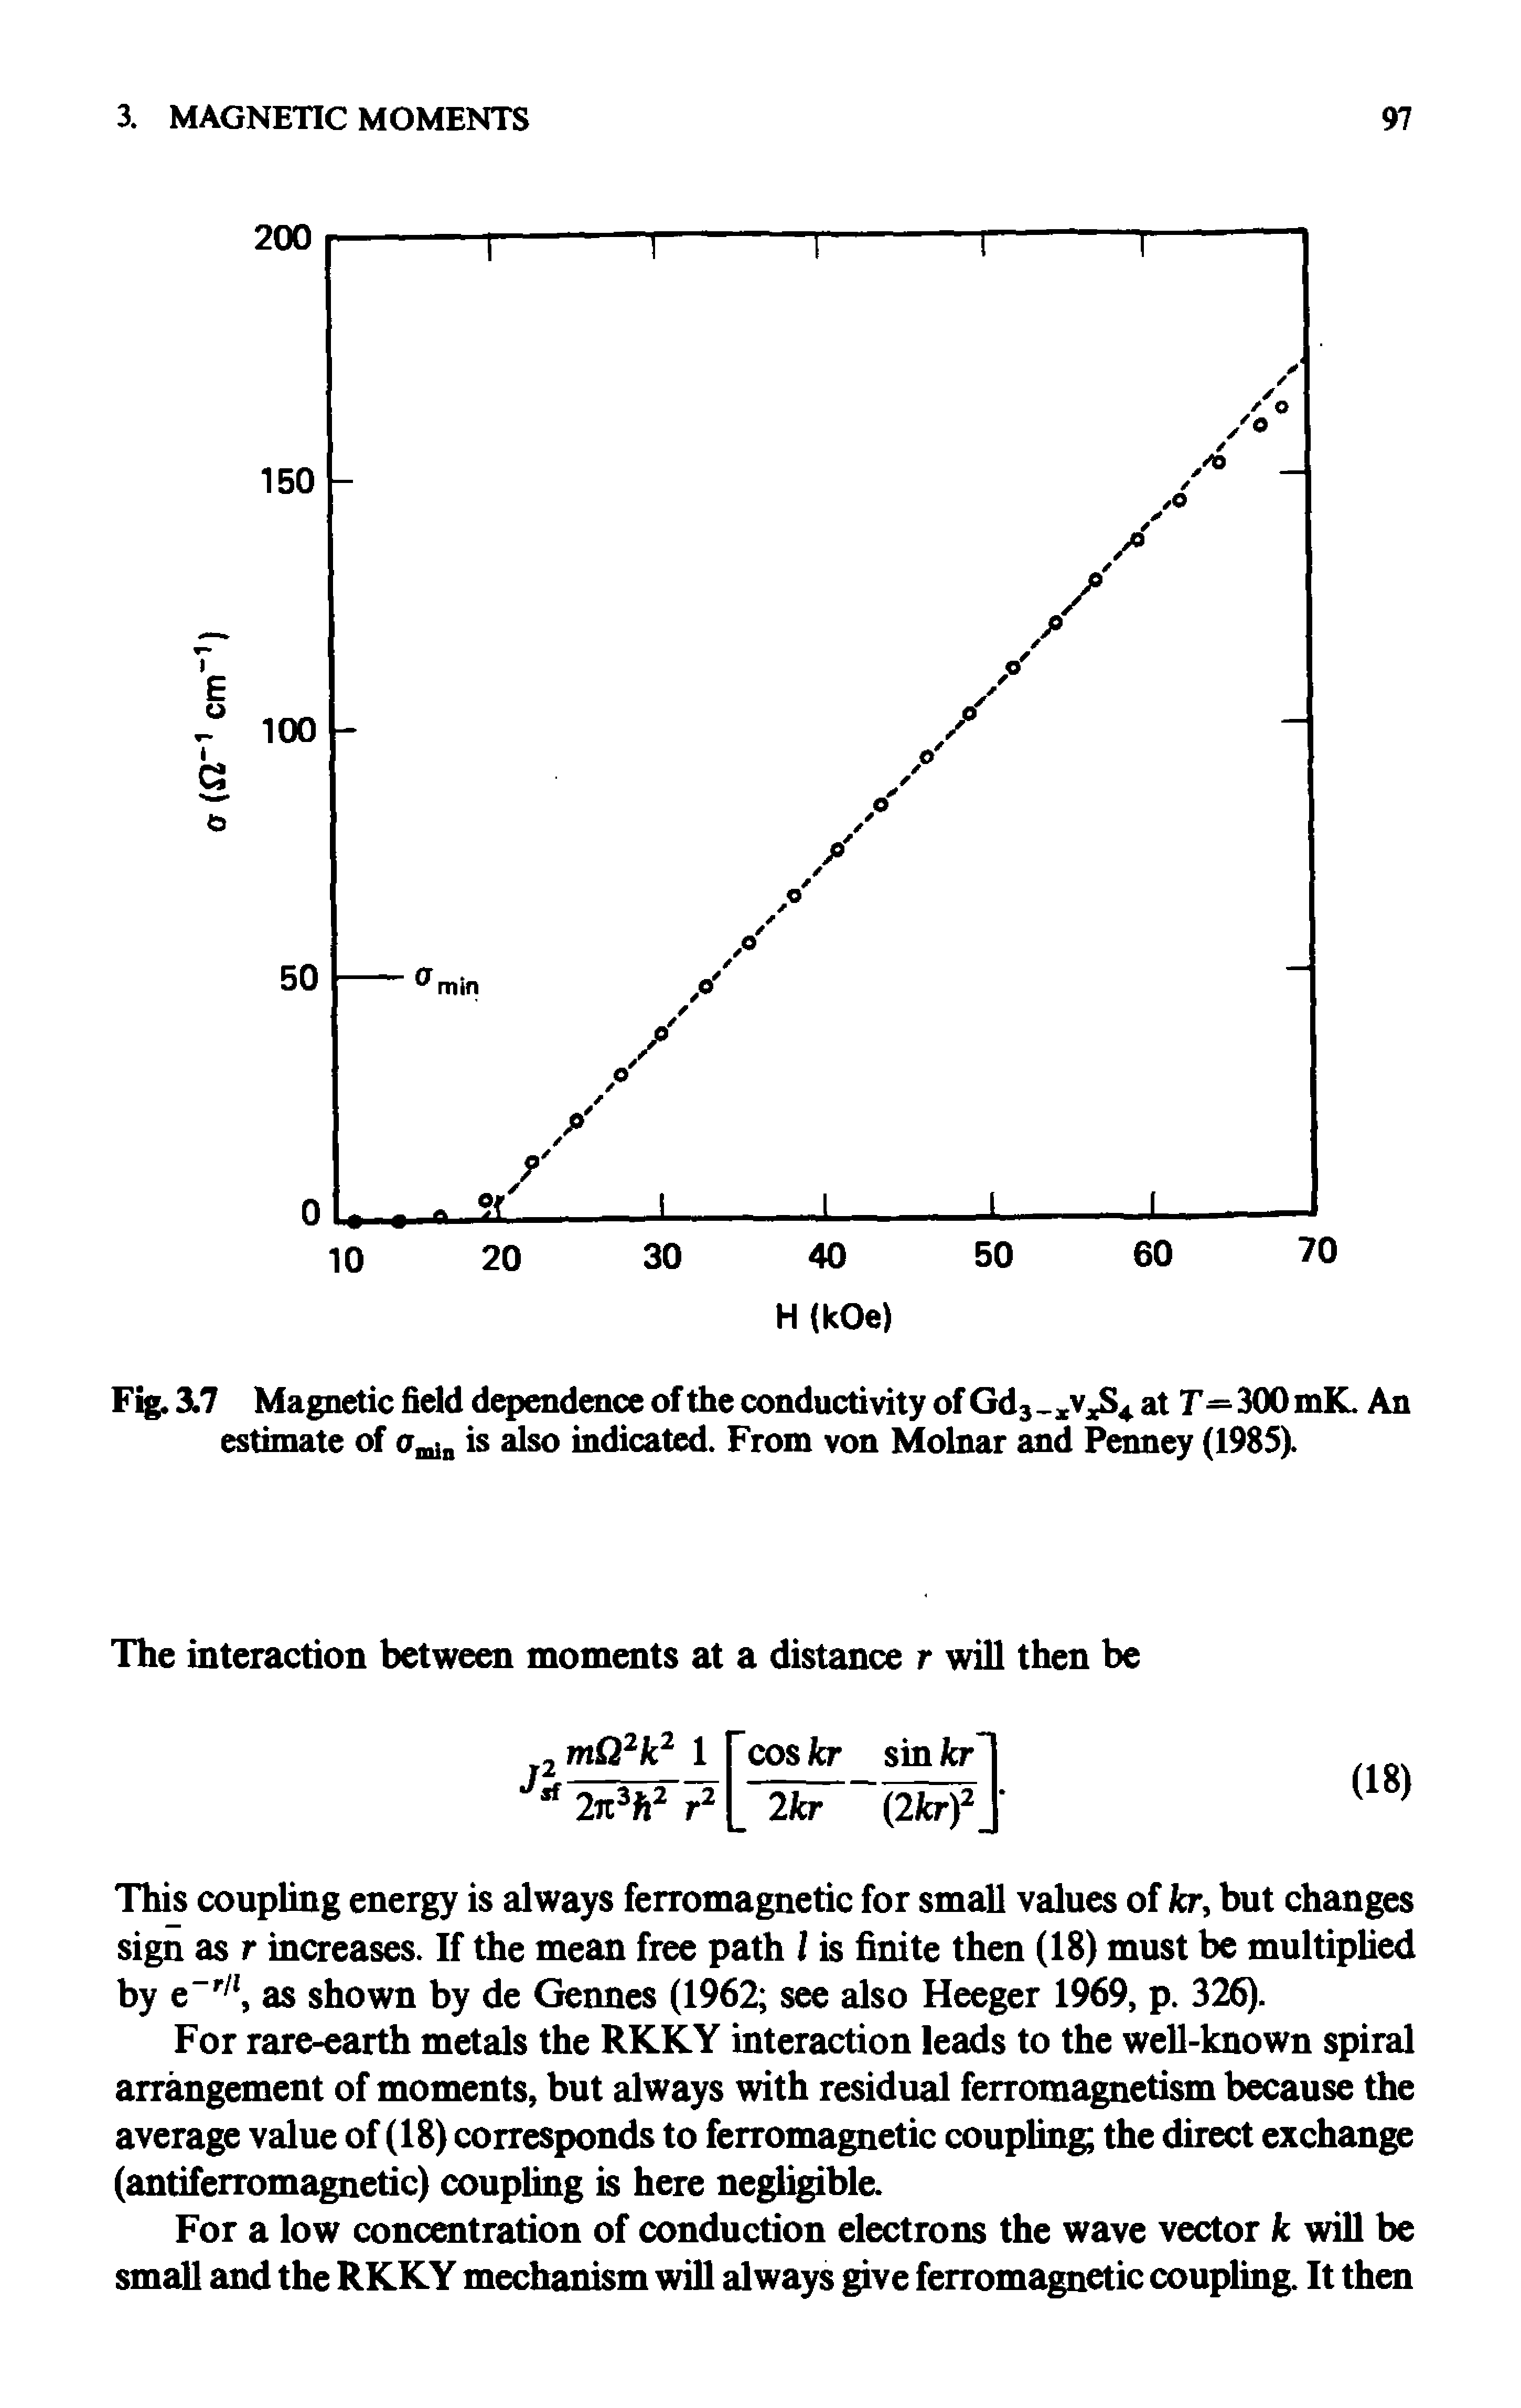 Fig. 3.7 Magnetic field dependence of the conductivity of Gd3 xvxS4 at T—300 mK. An estimate of is also indicated. From von Molnar and Penney (1985).